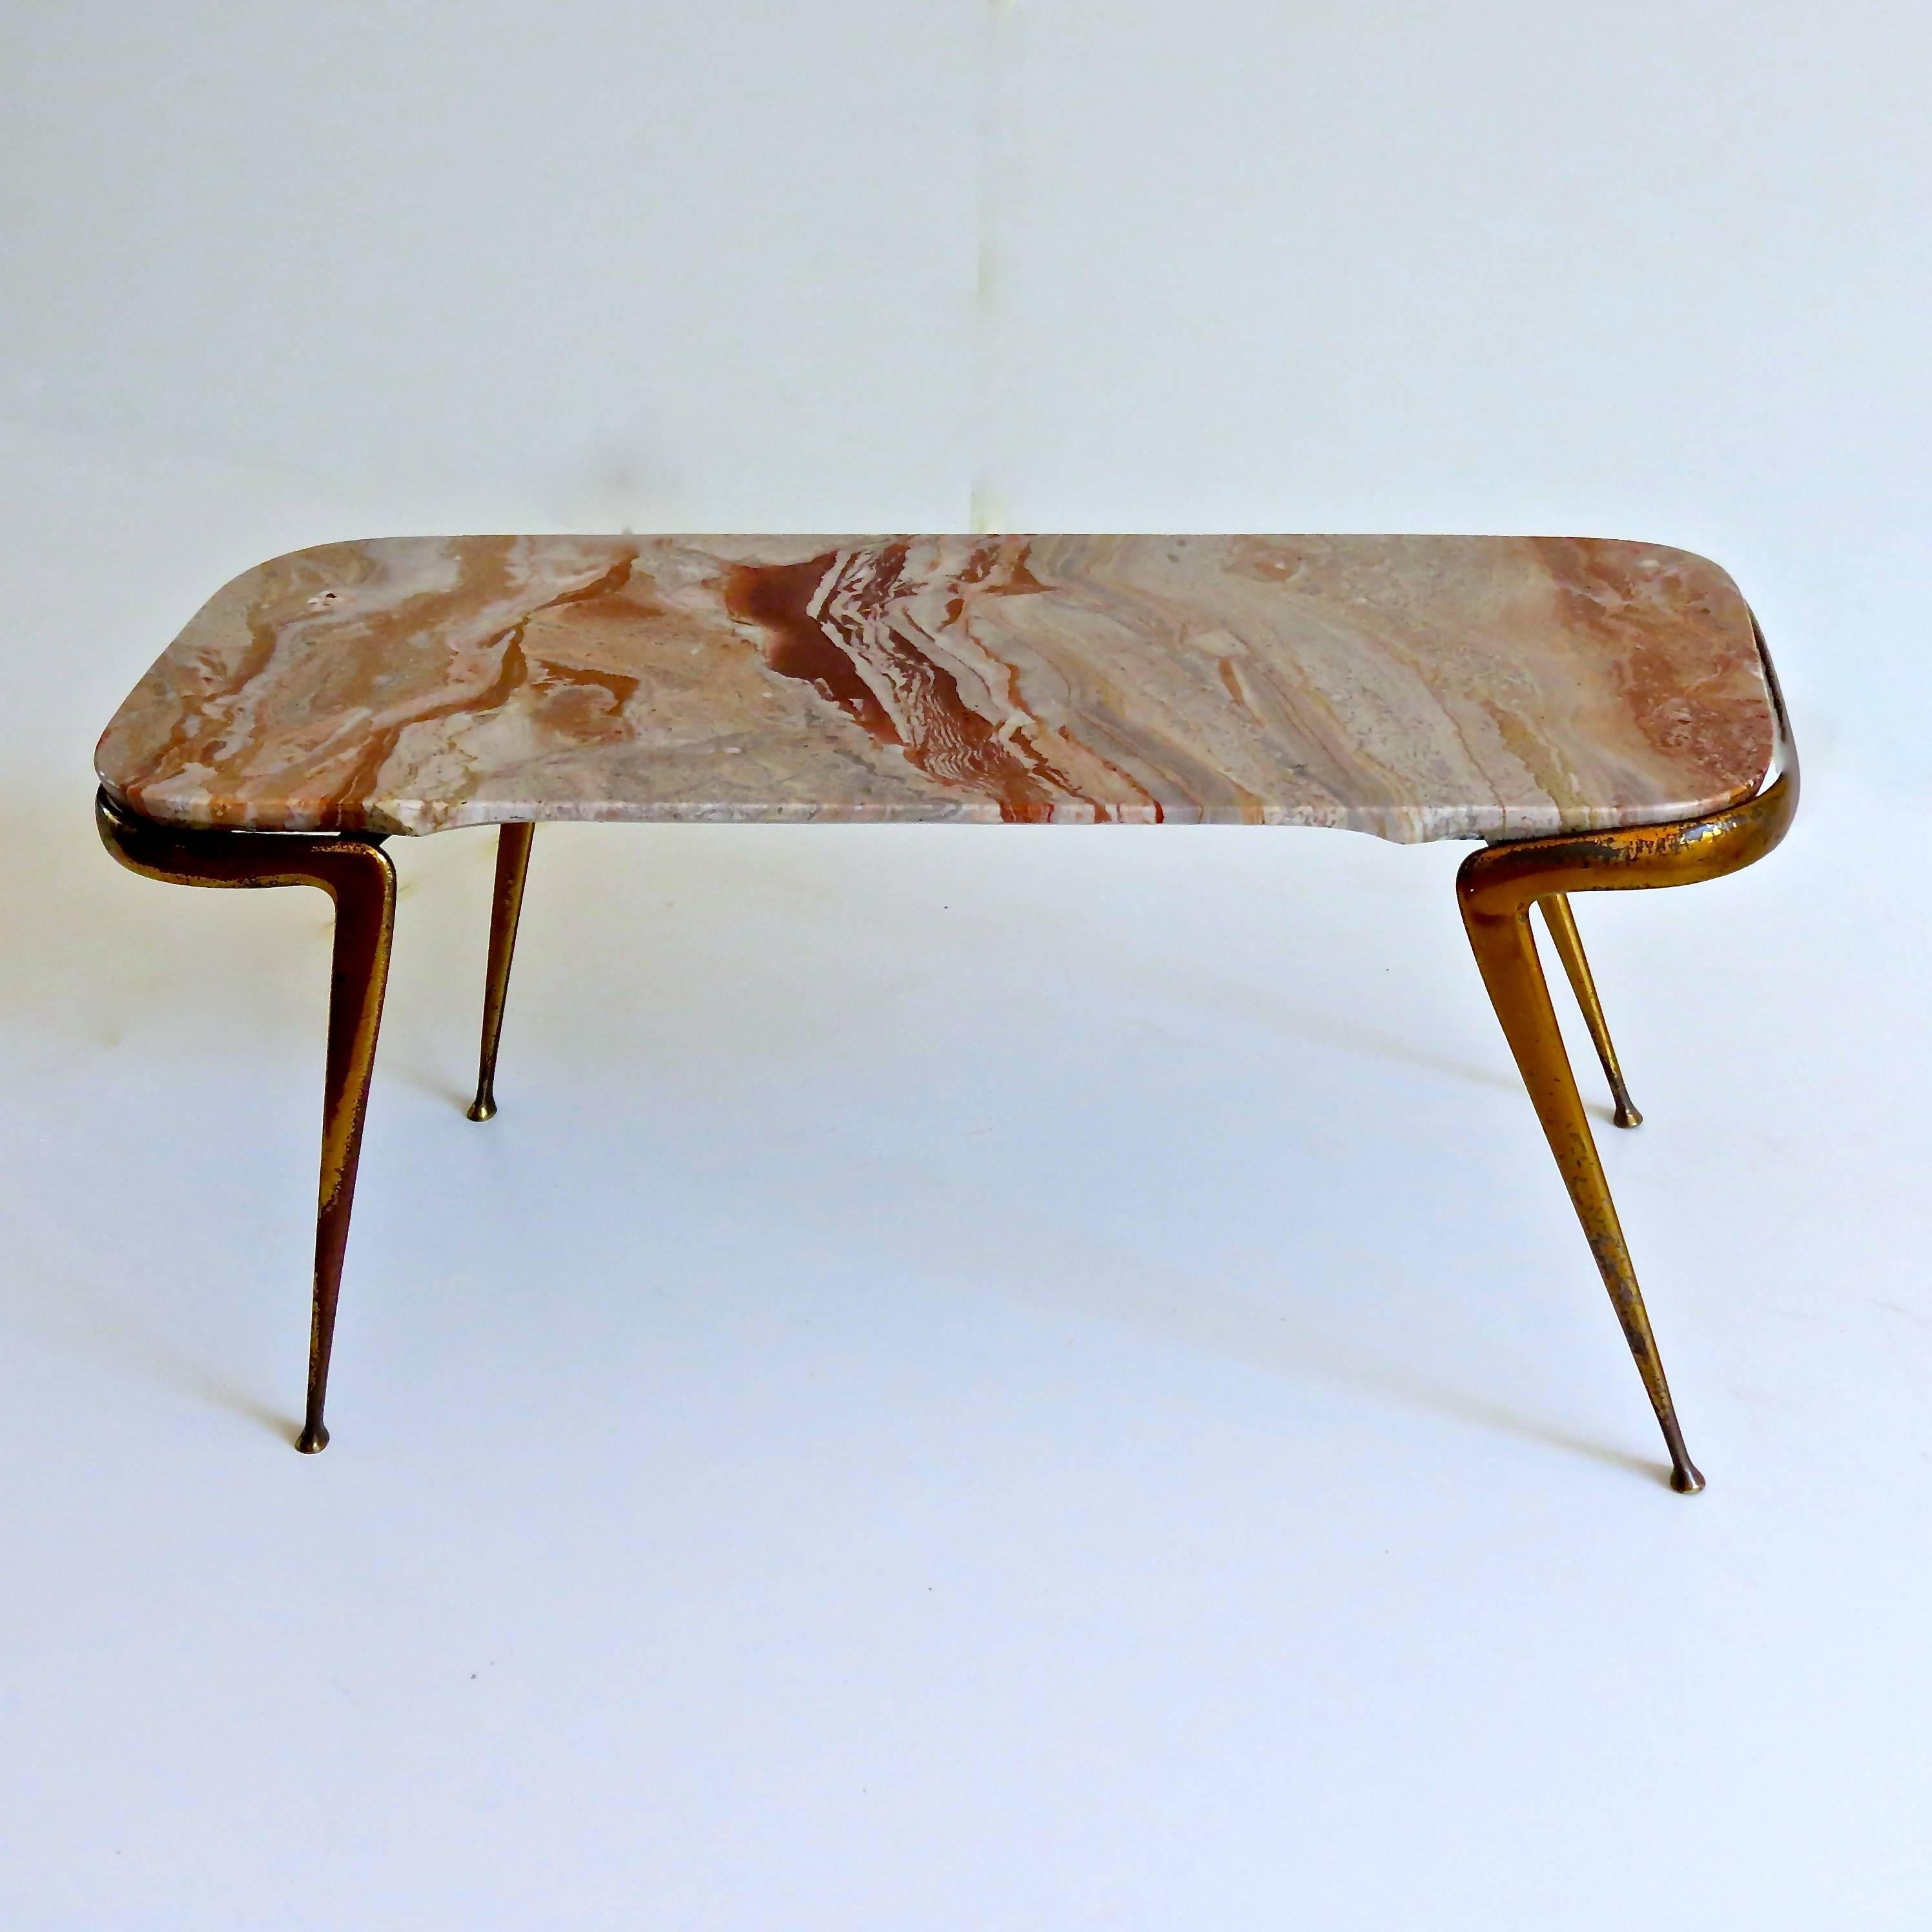 Fine occasional table designed by Cesare Lacca, circa 1950
Brass legs, Italian breccia marble-top
Good condition, some little scratch in the brass
Measures: H 41 cm 92 x 43 cm.
 